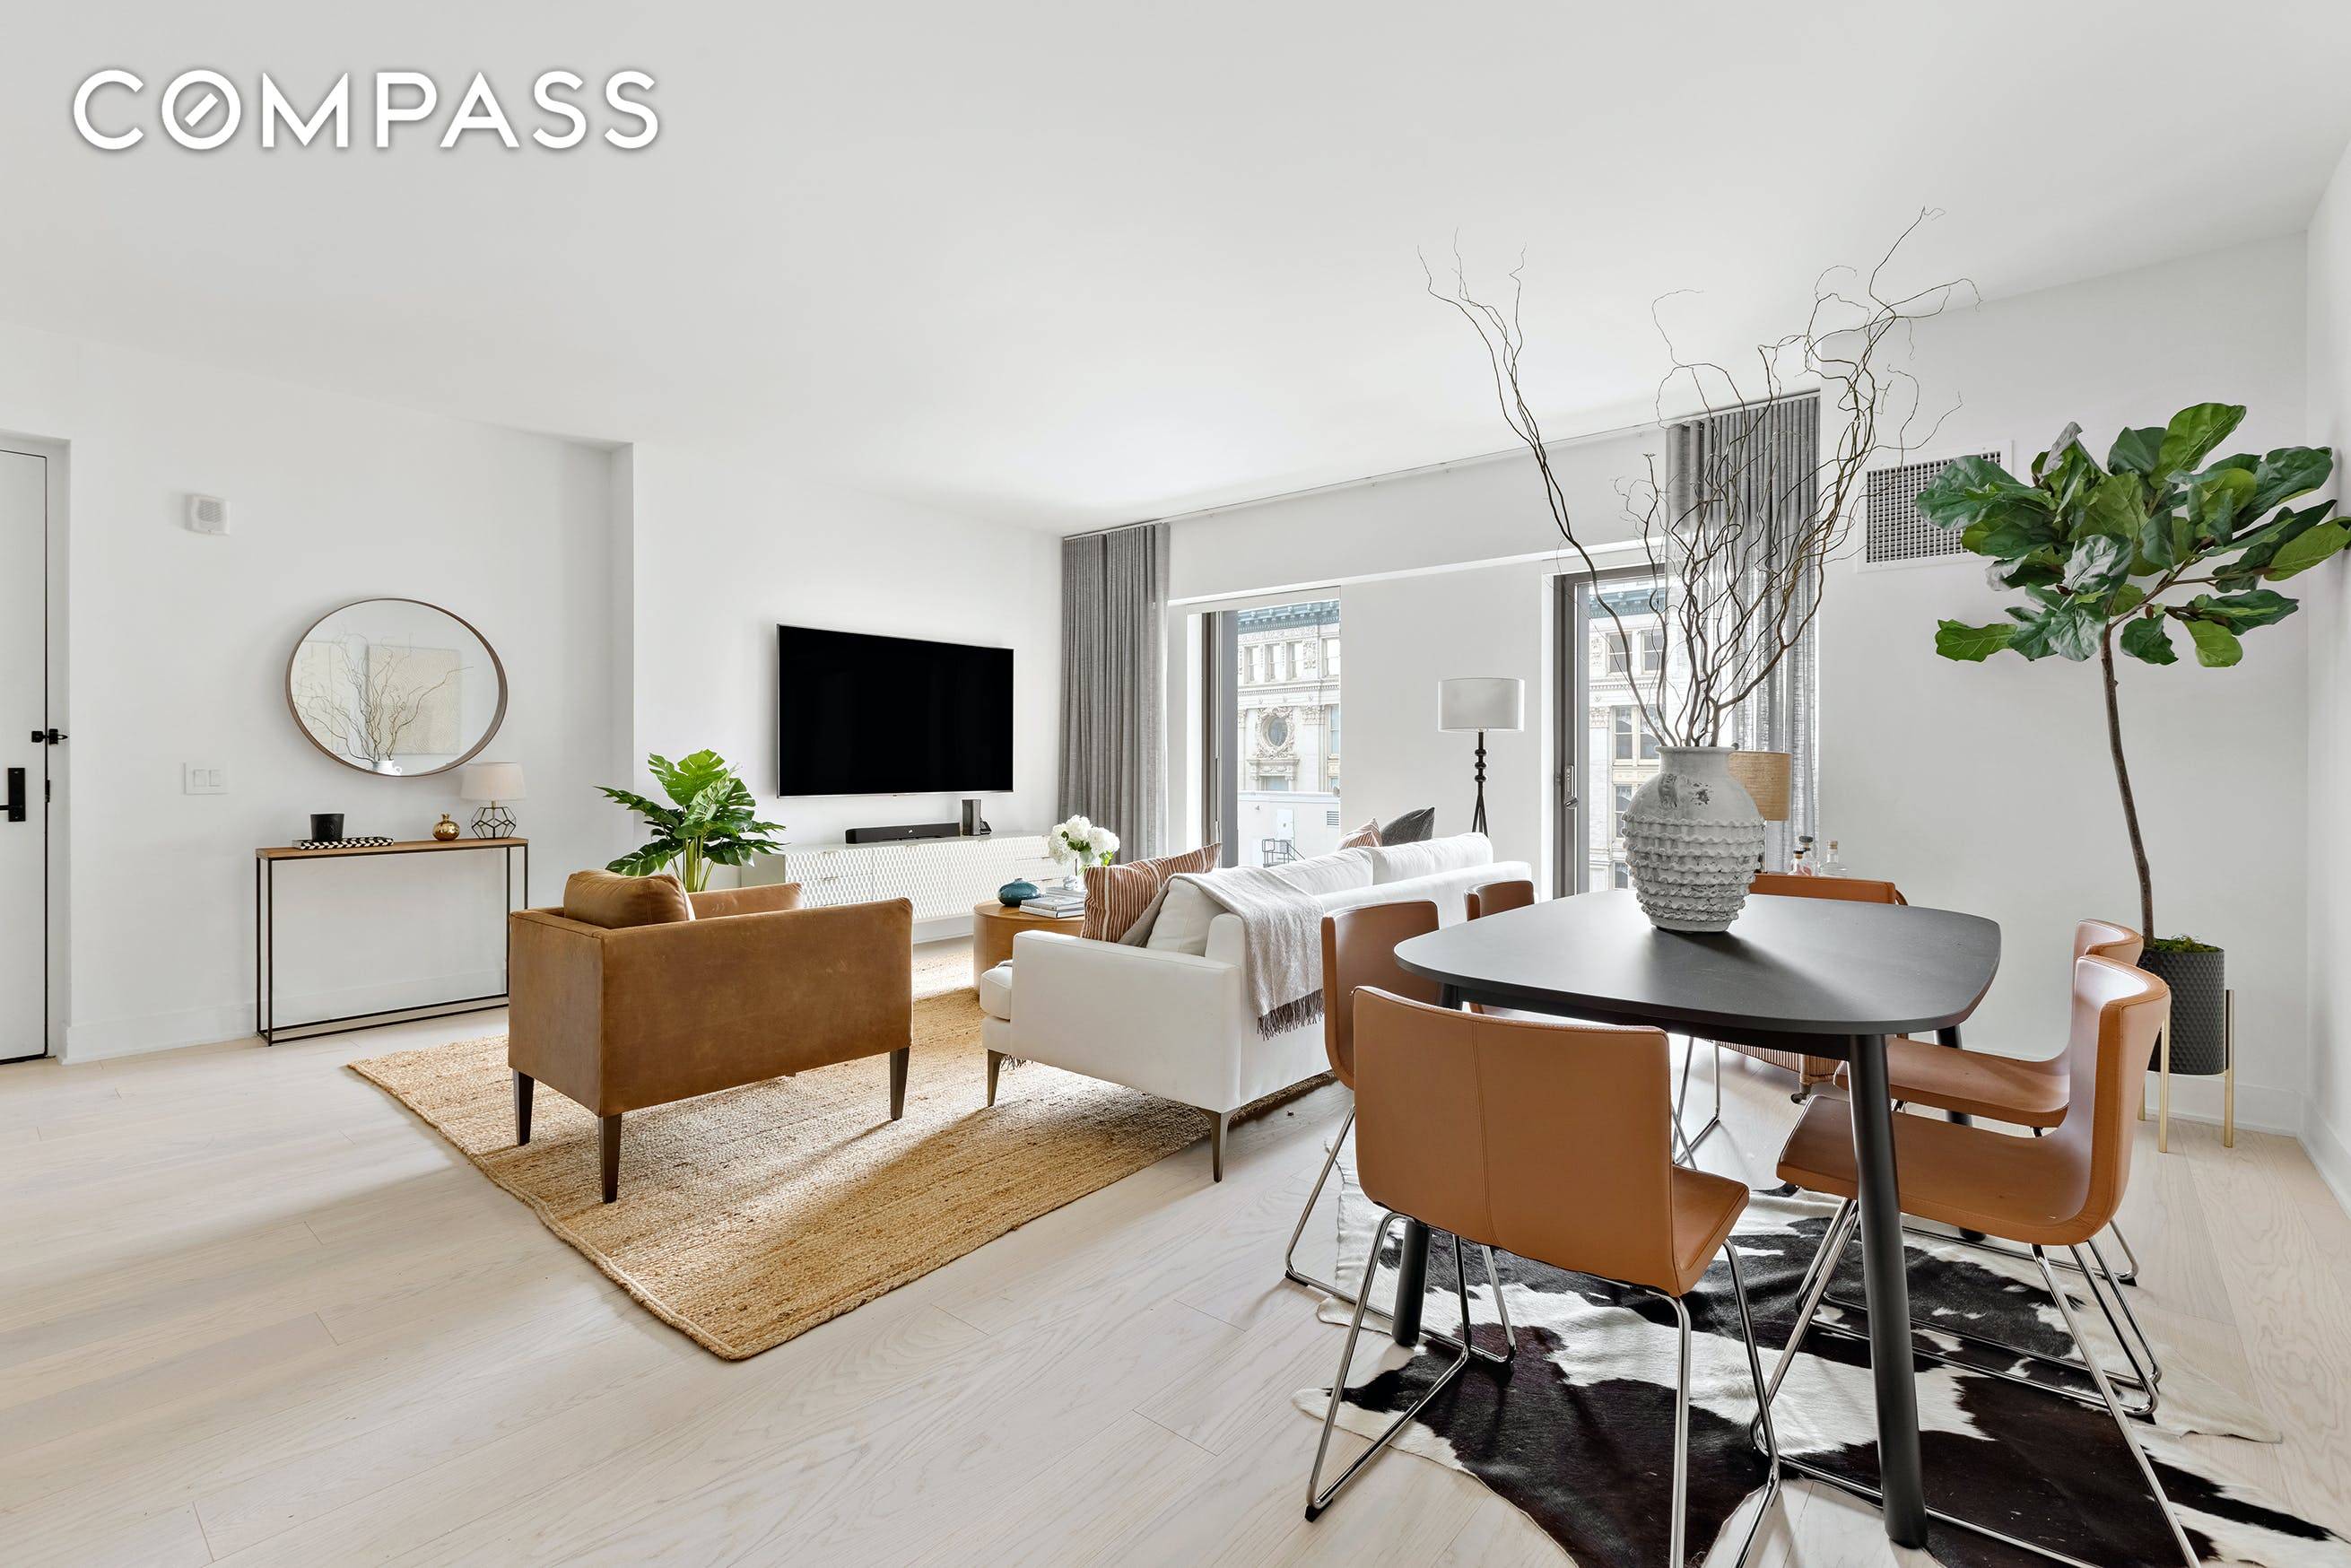 Situated at the intersection of Flatiron, Chelsea, and Union Square, this spacious, stunningly imagined 3 bedroom, 2.